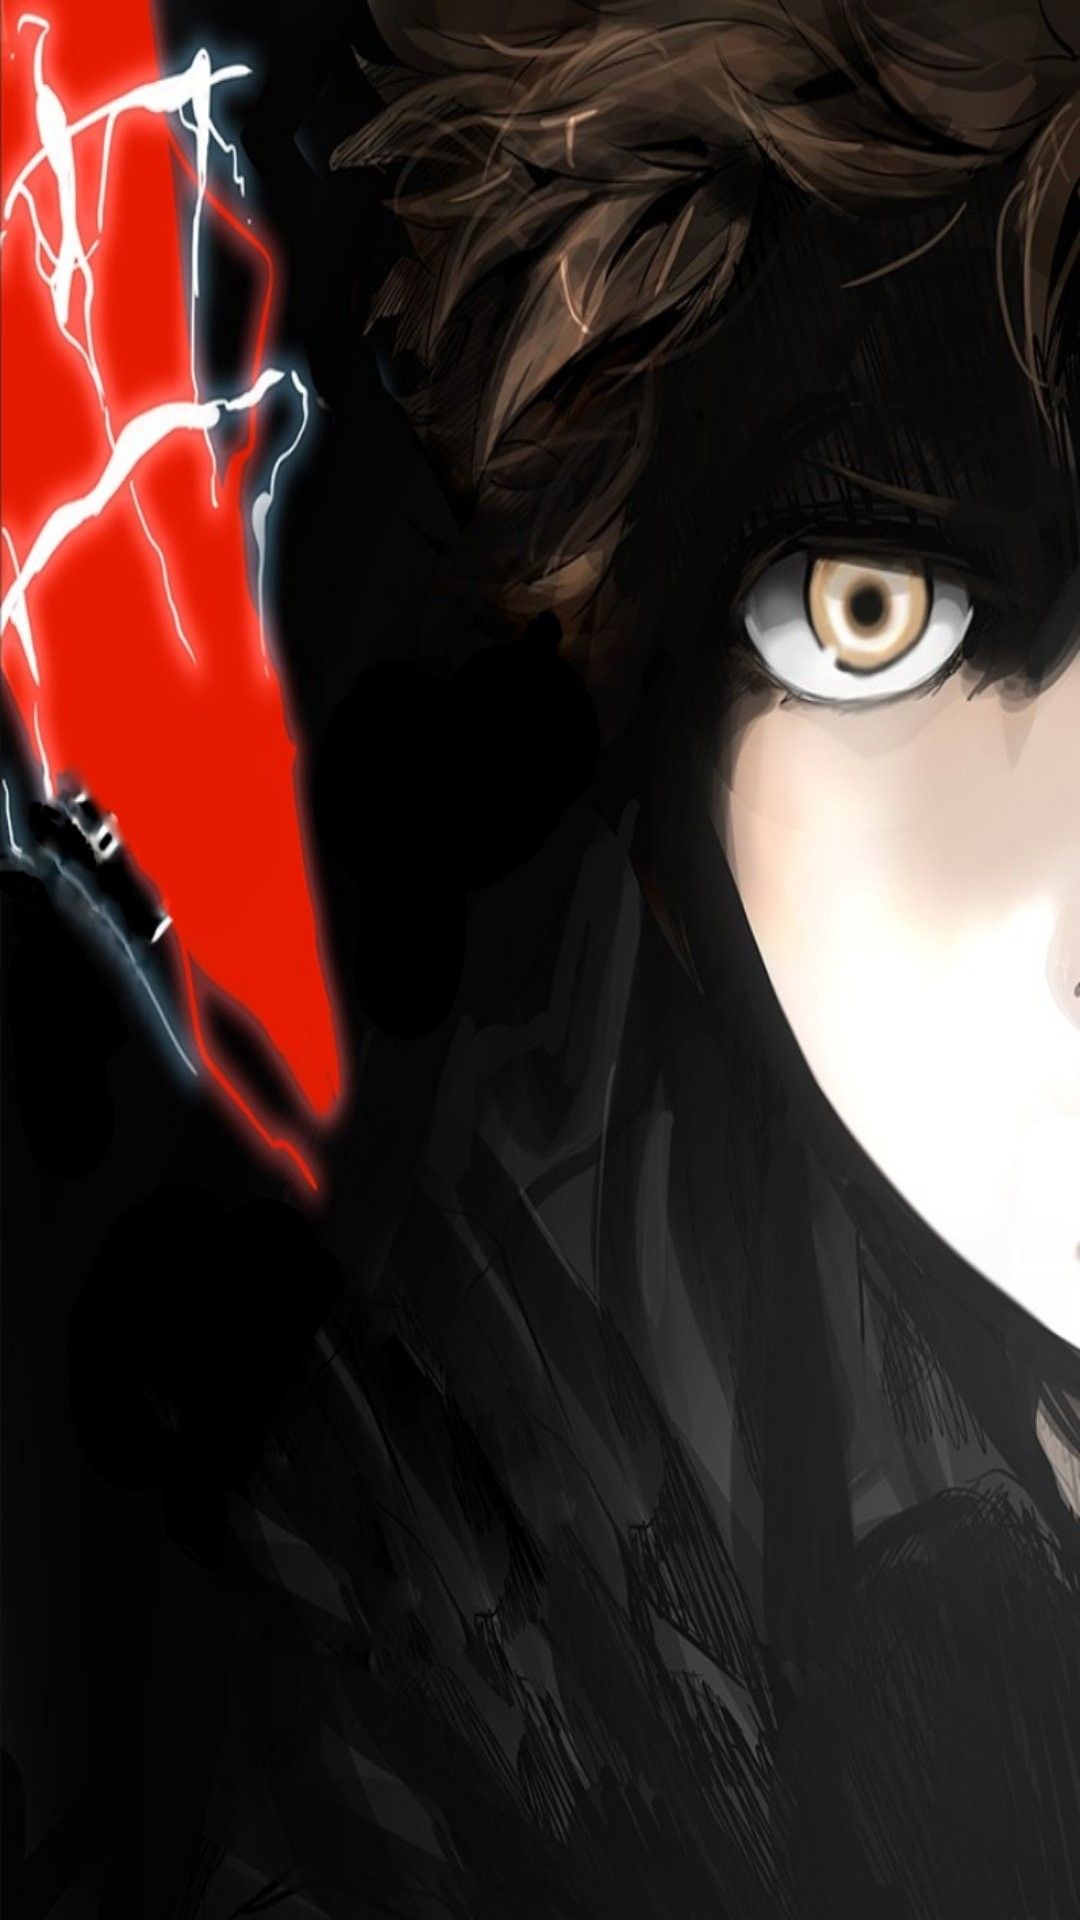 Tower of god wallpaper c anime tower anime shows